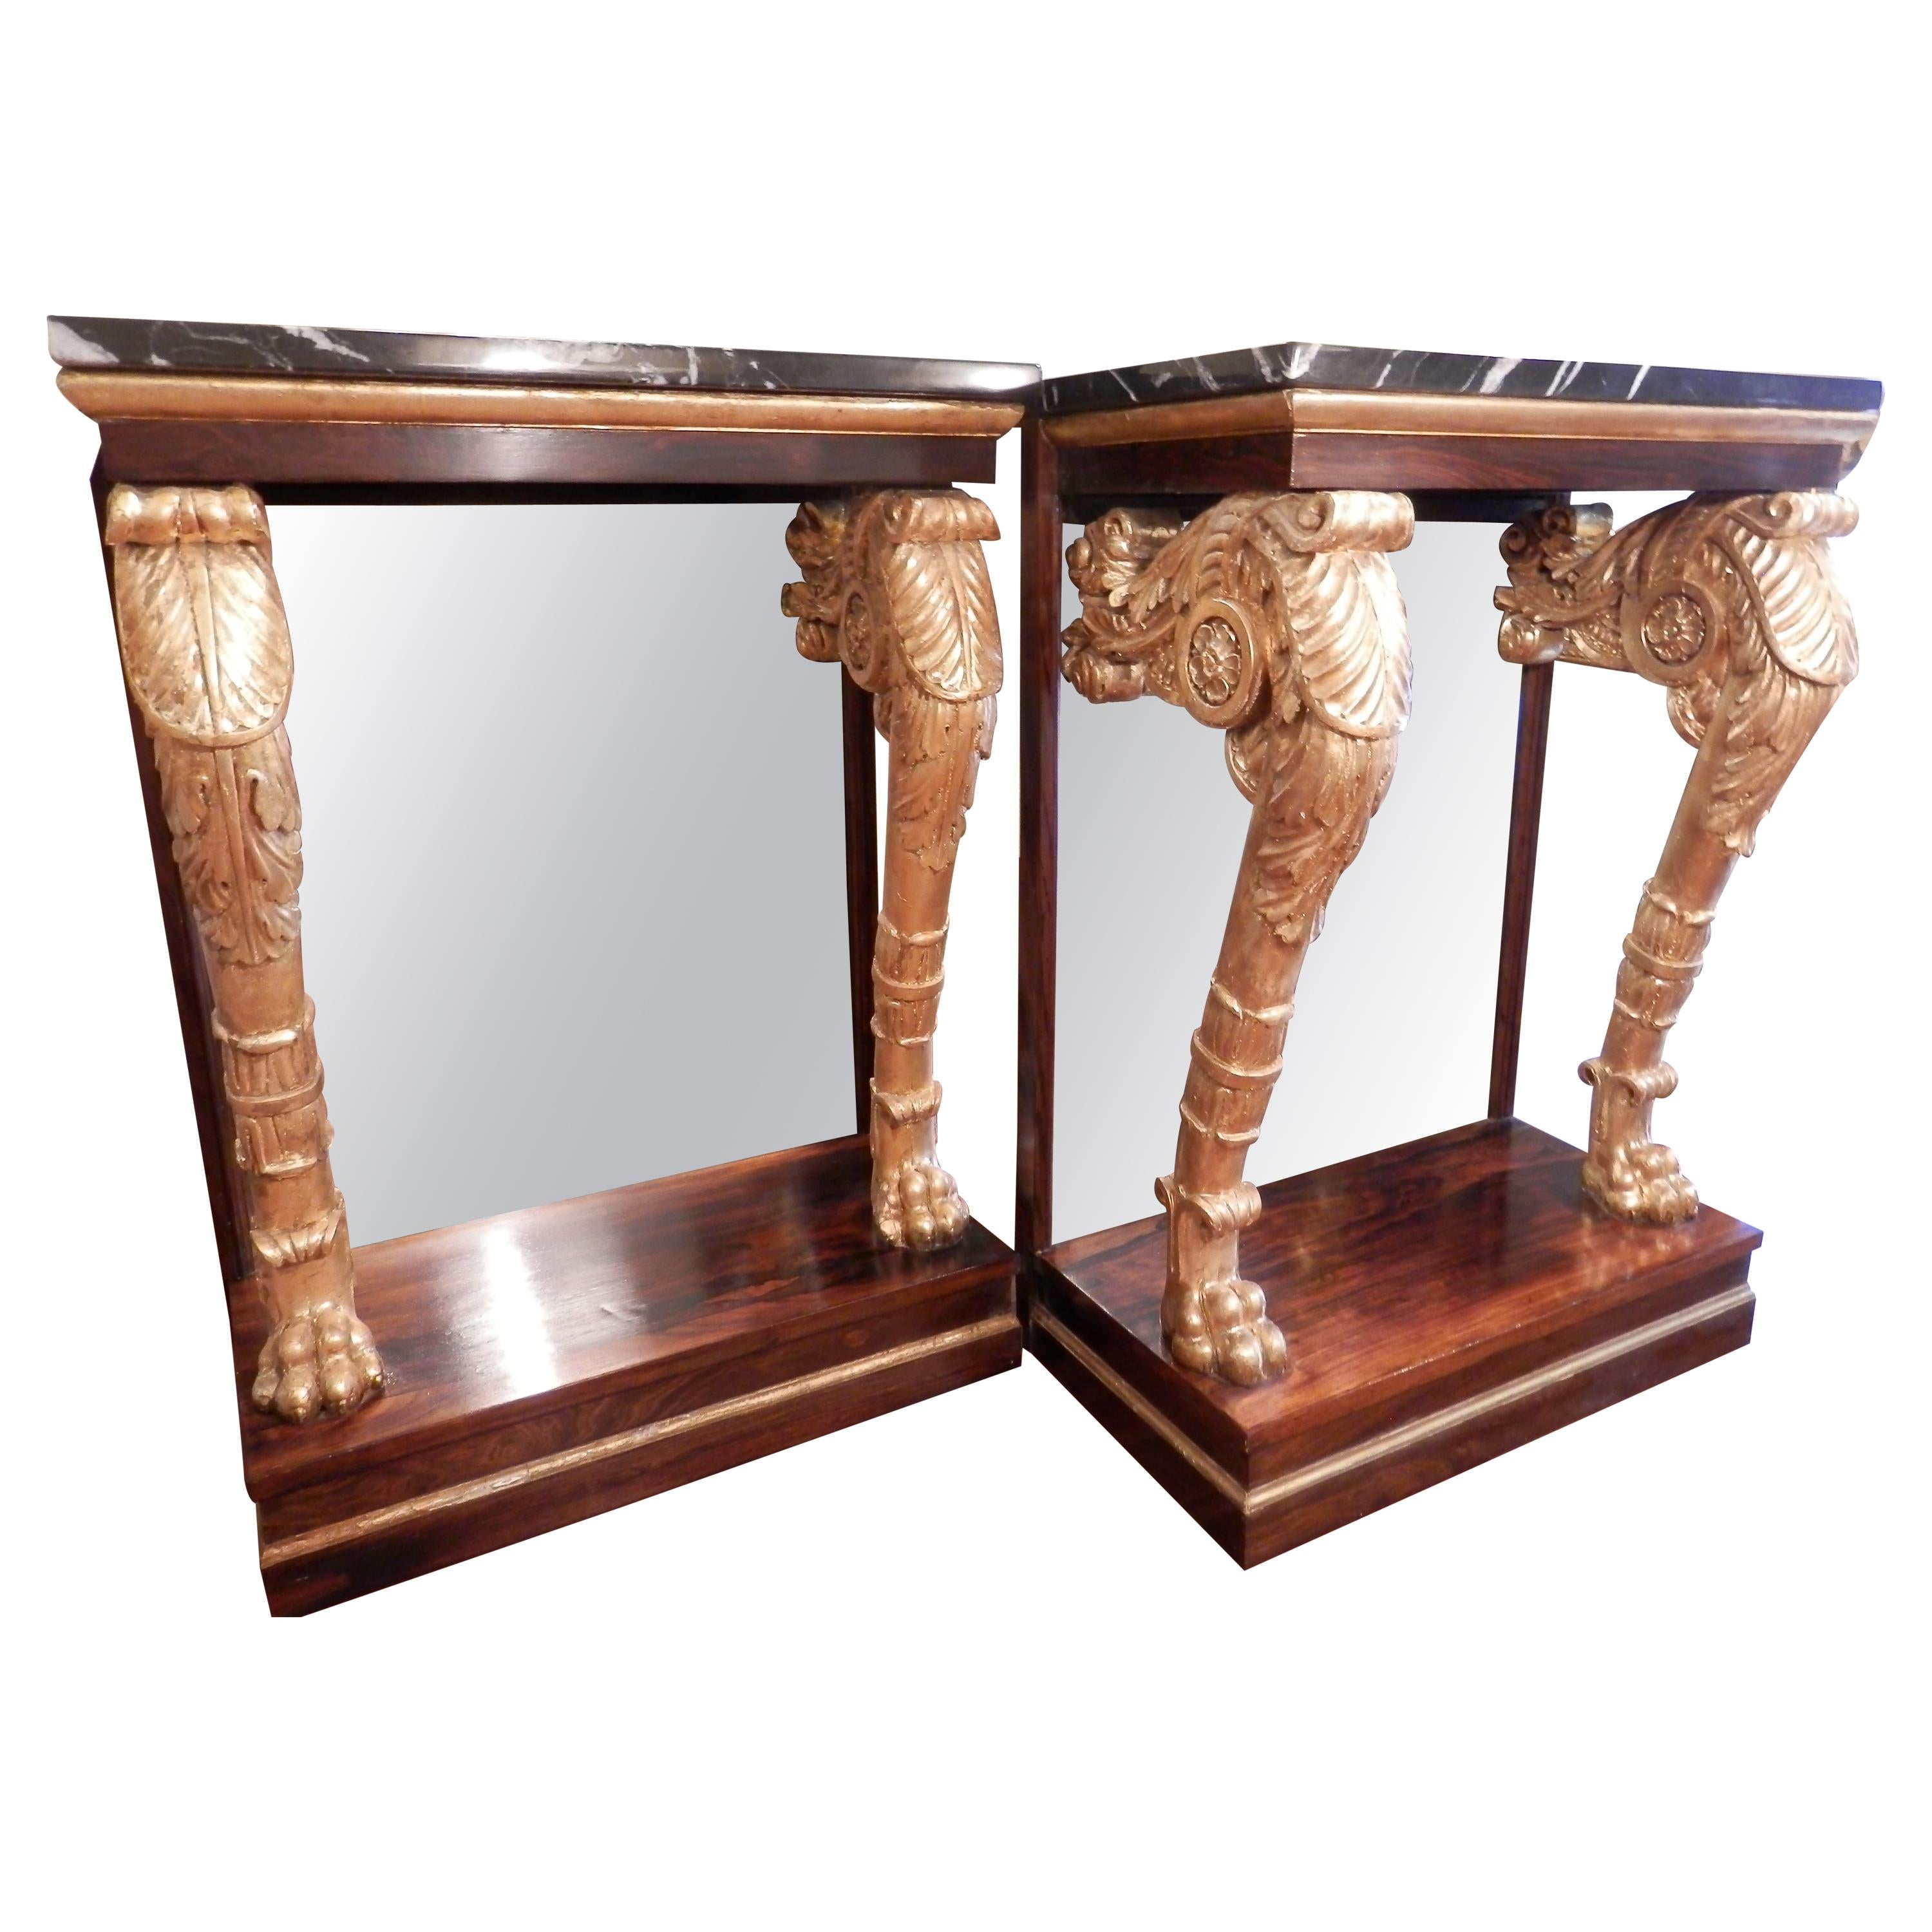 A fine pair of Regency rosewood and parcel gilt marble top consoles 